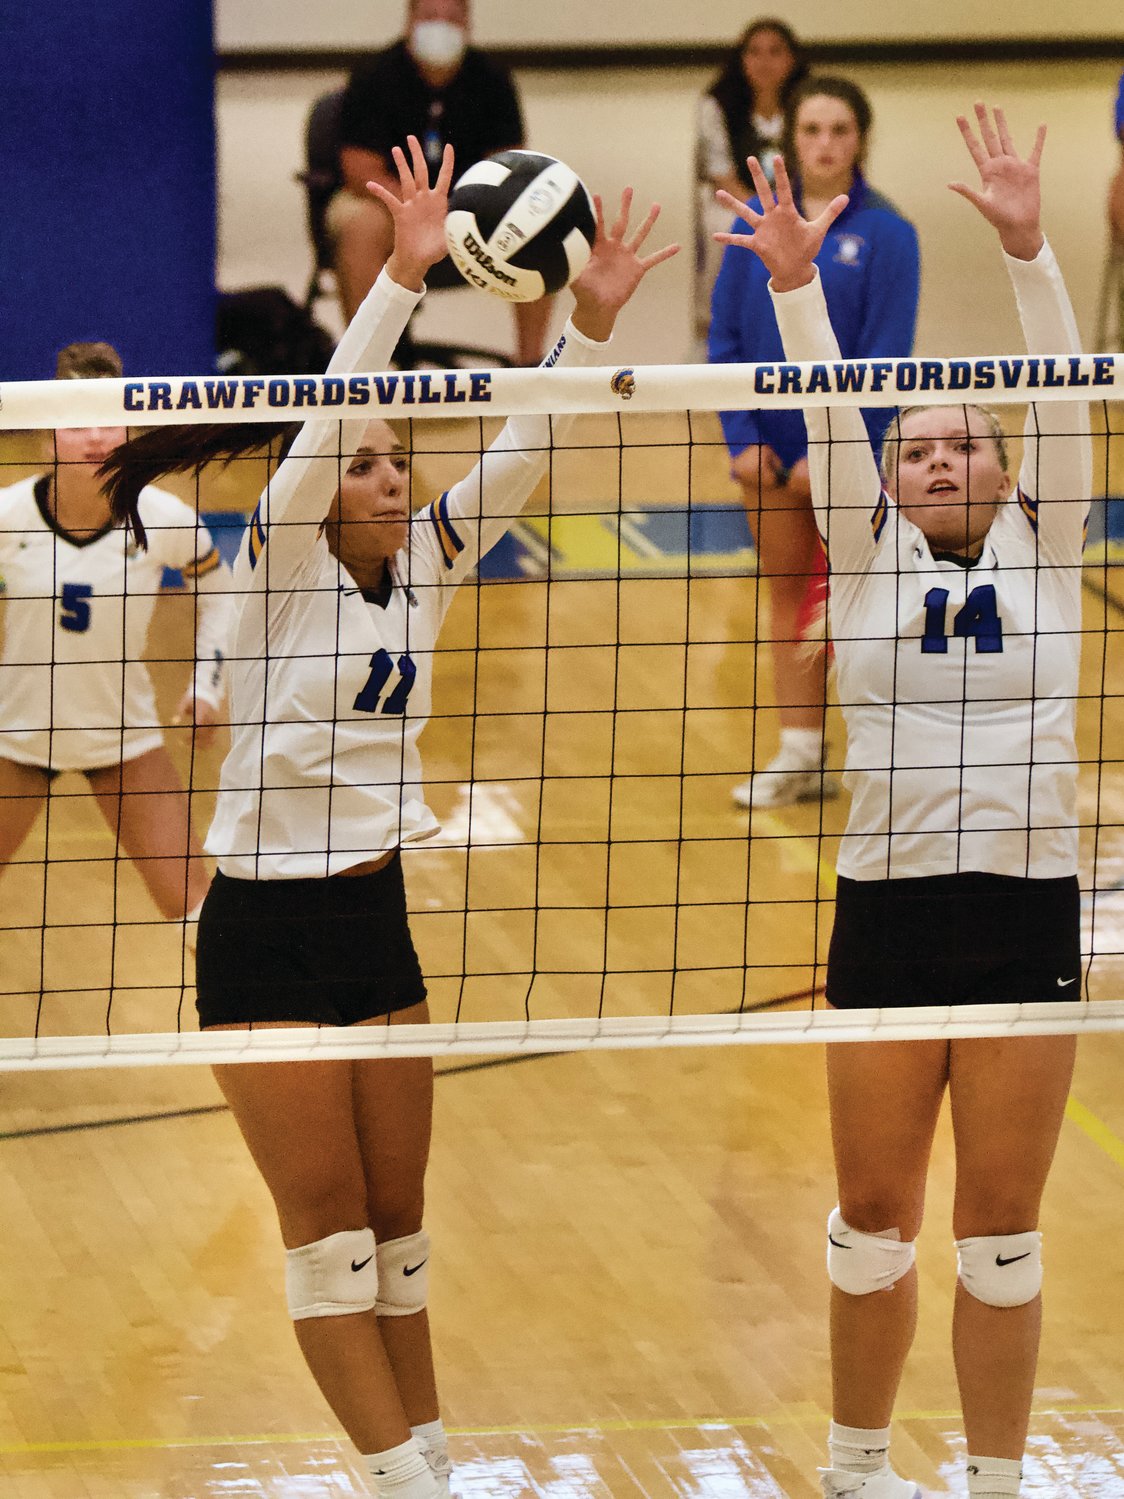 Crawfordsville senior Alyx Bannon skies for a block on Tuesday night against Crawfordsville.